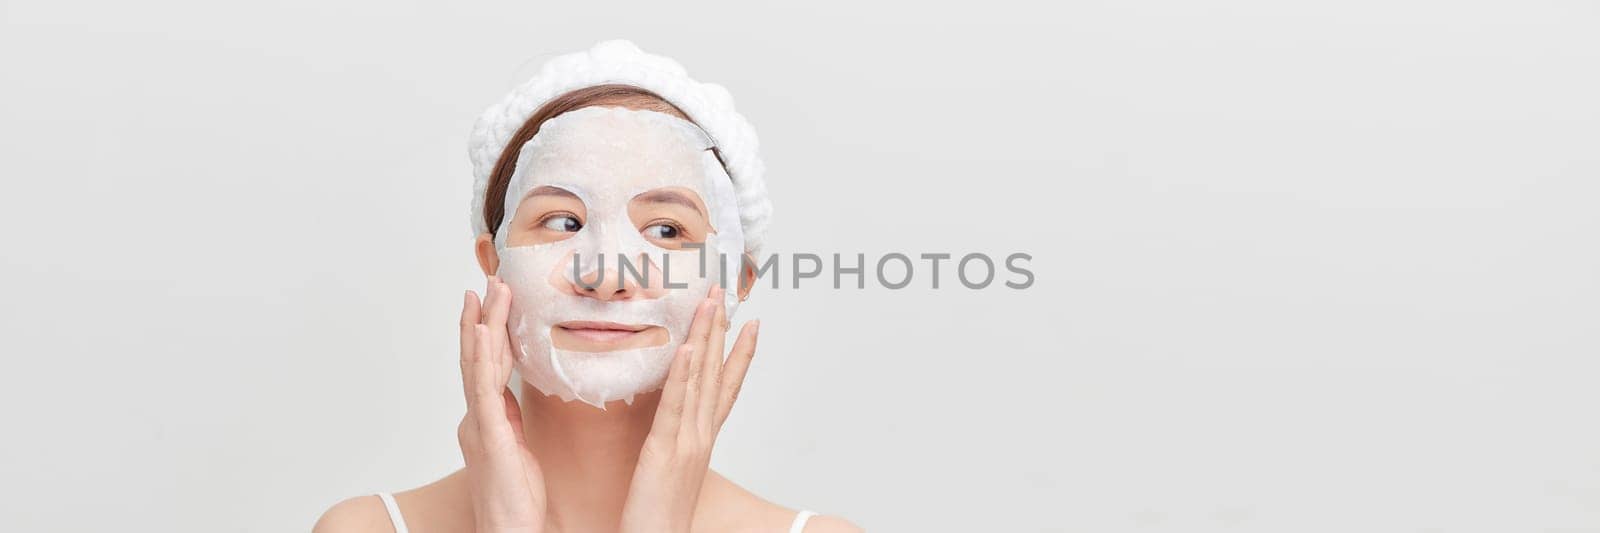 Girl taking care of skin complexion with sheet mask on her face.